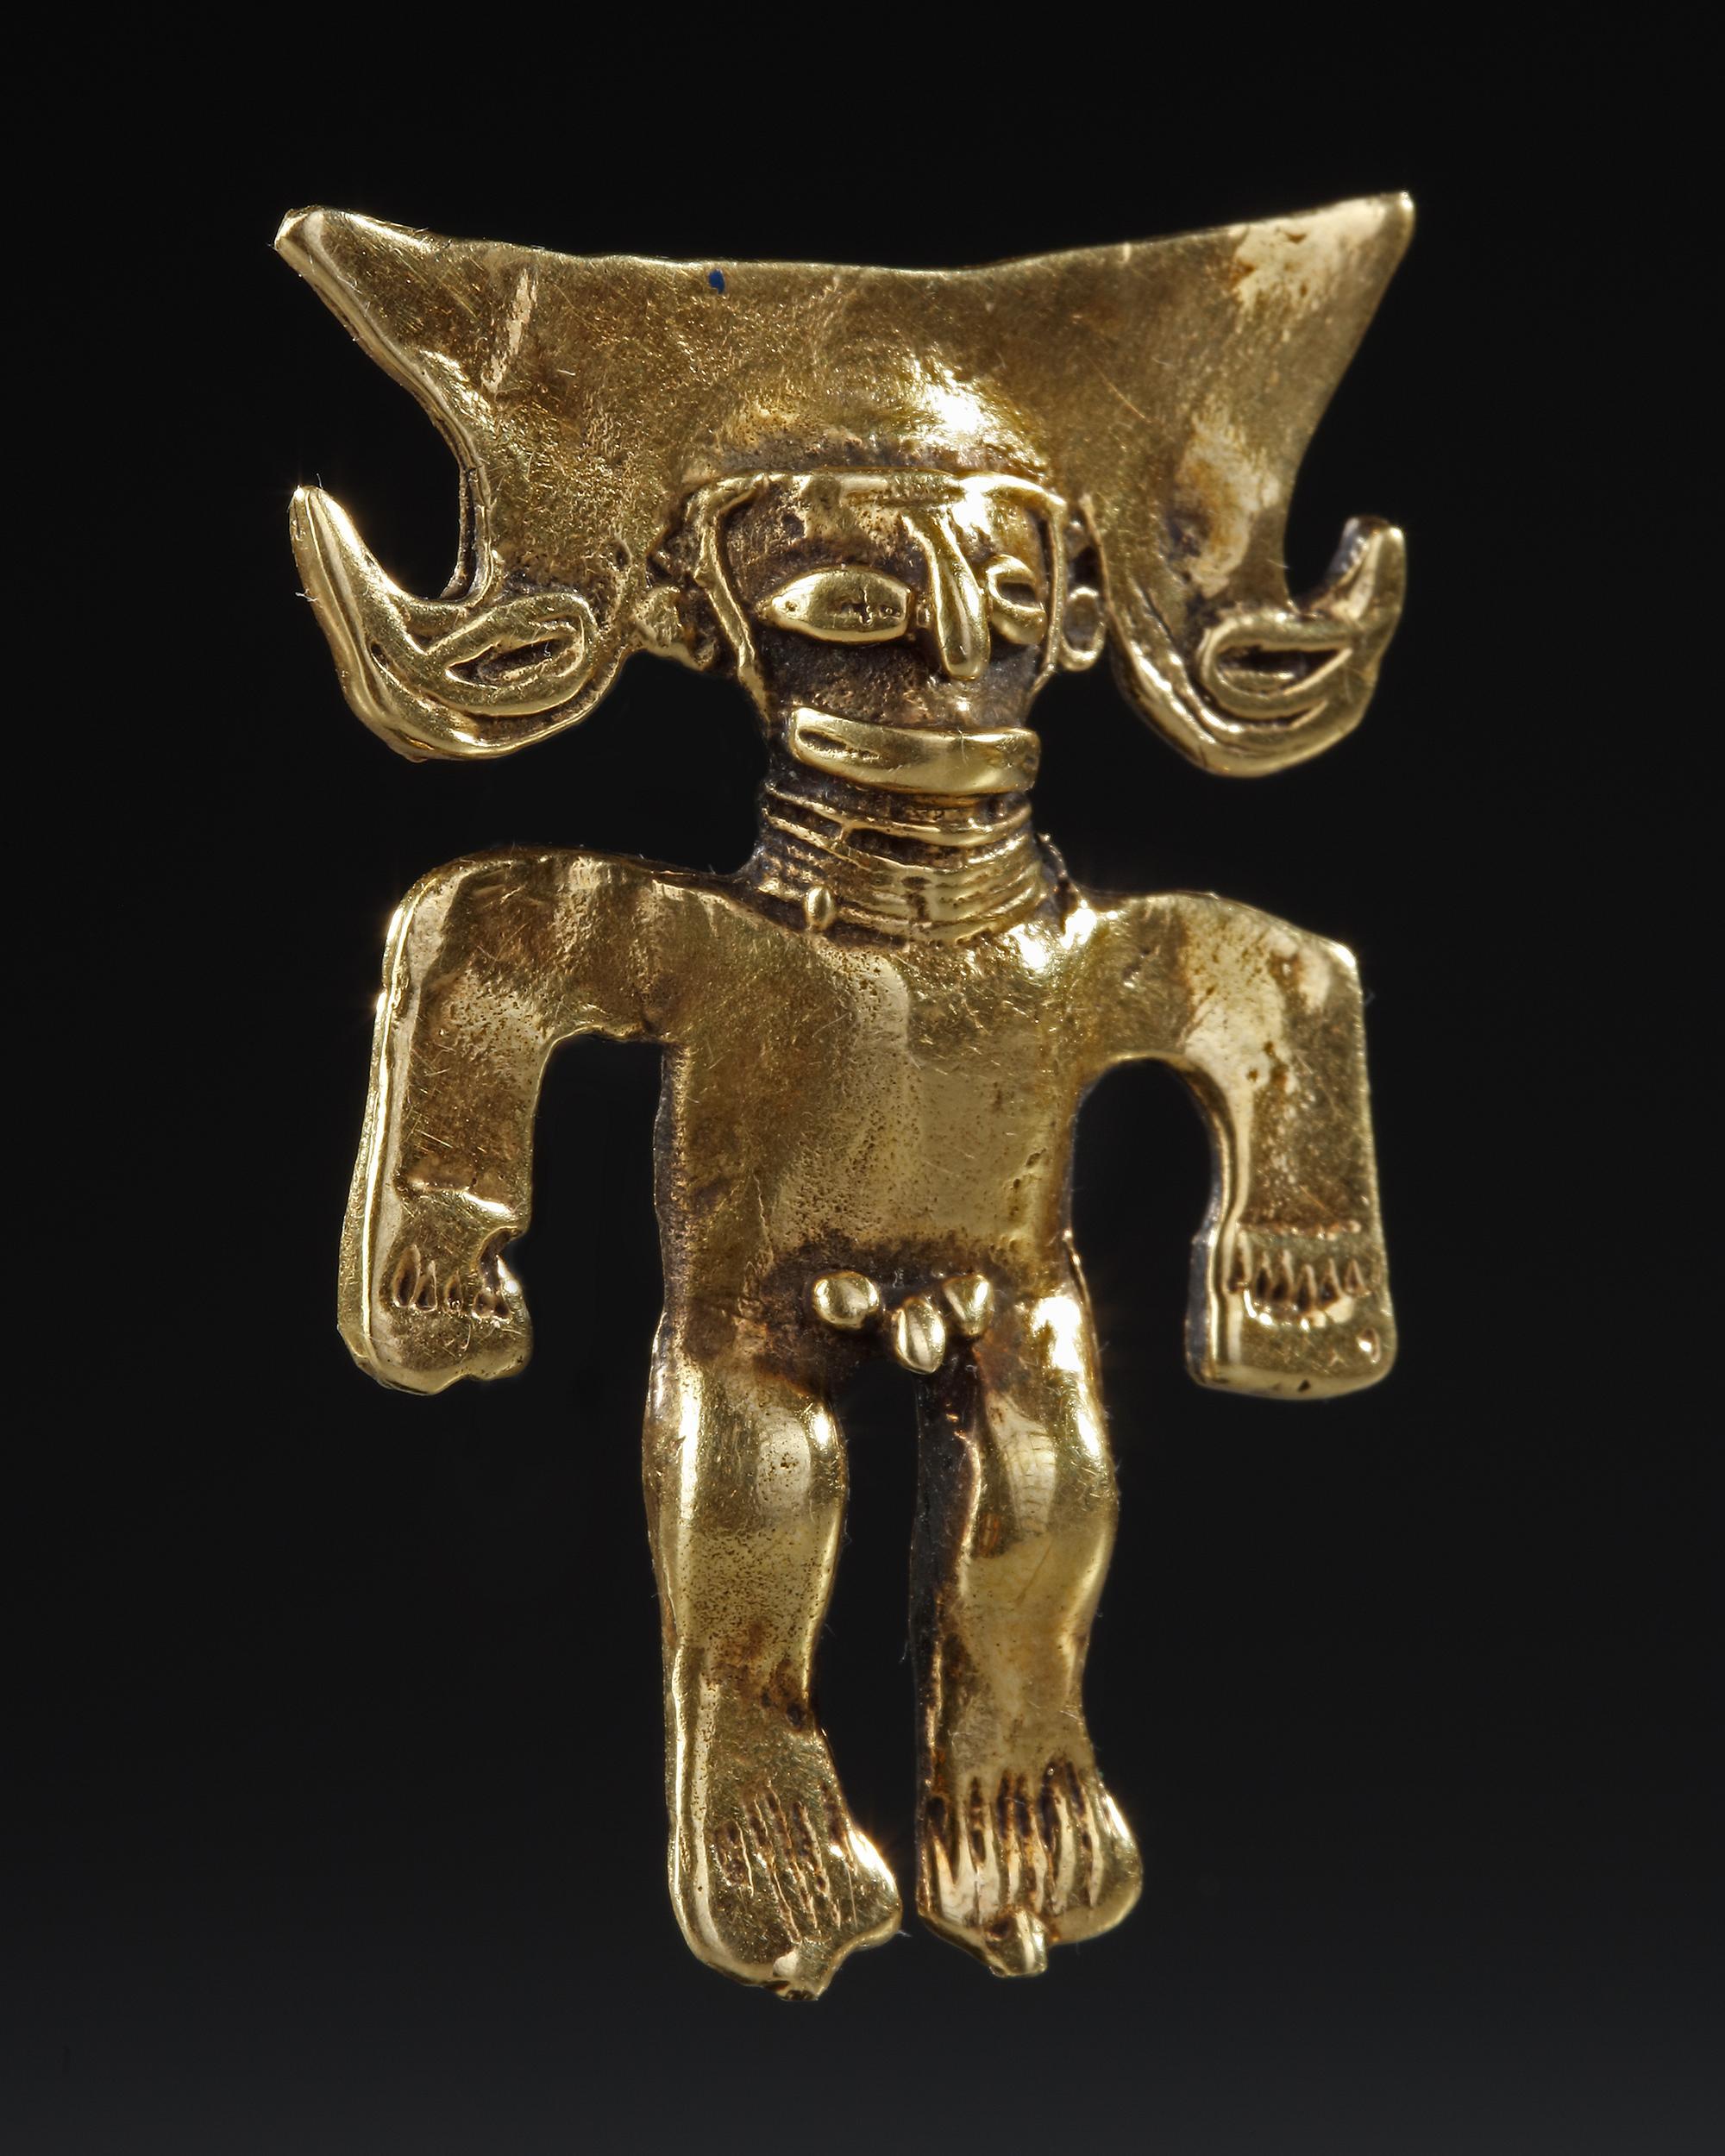 A PRE COLOMBIAN GOLD FIGURE, CIRCA 800-1200 A.D - Image 3 of 4